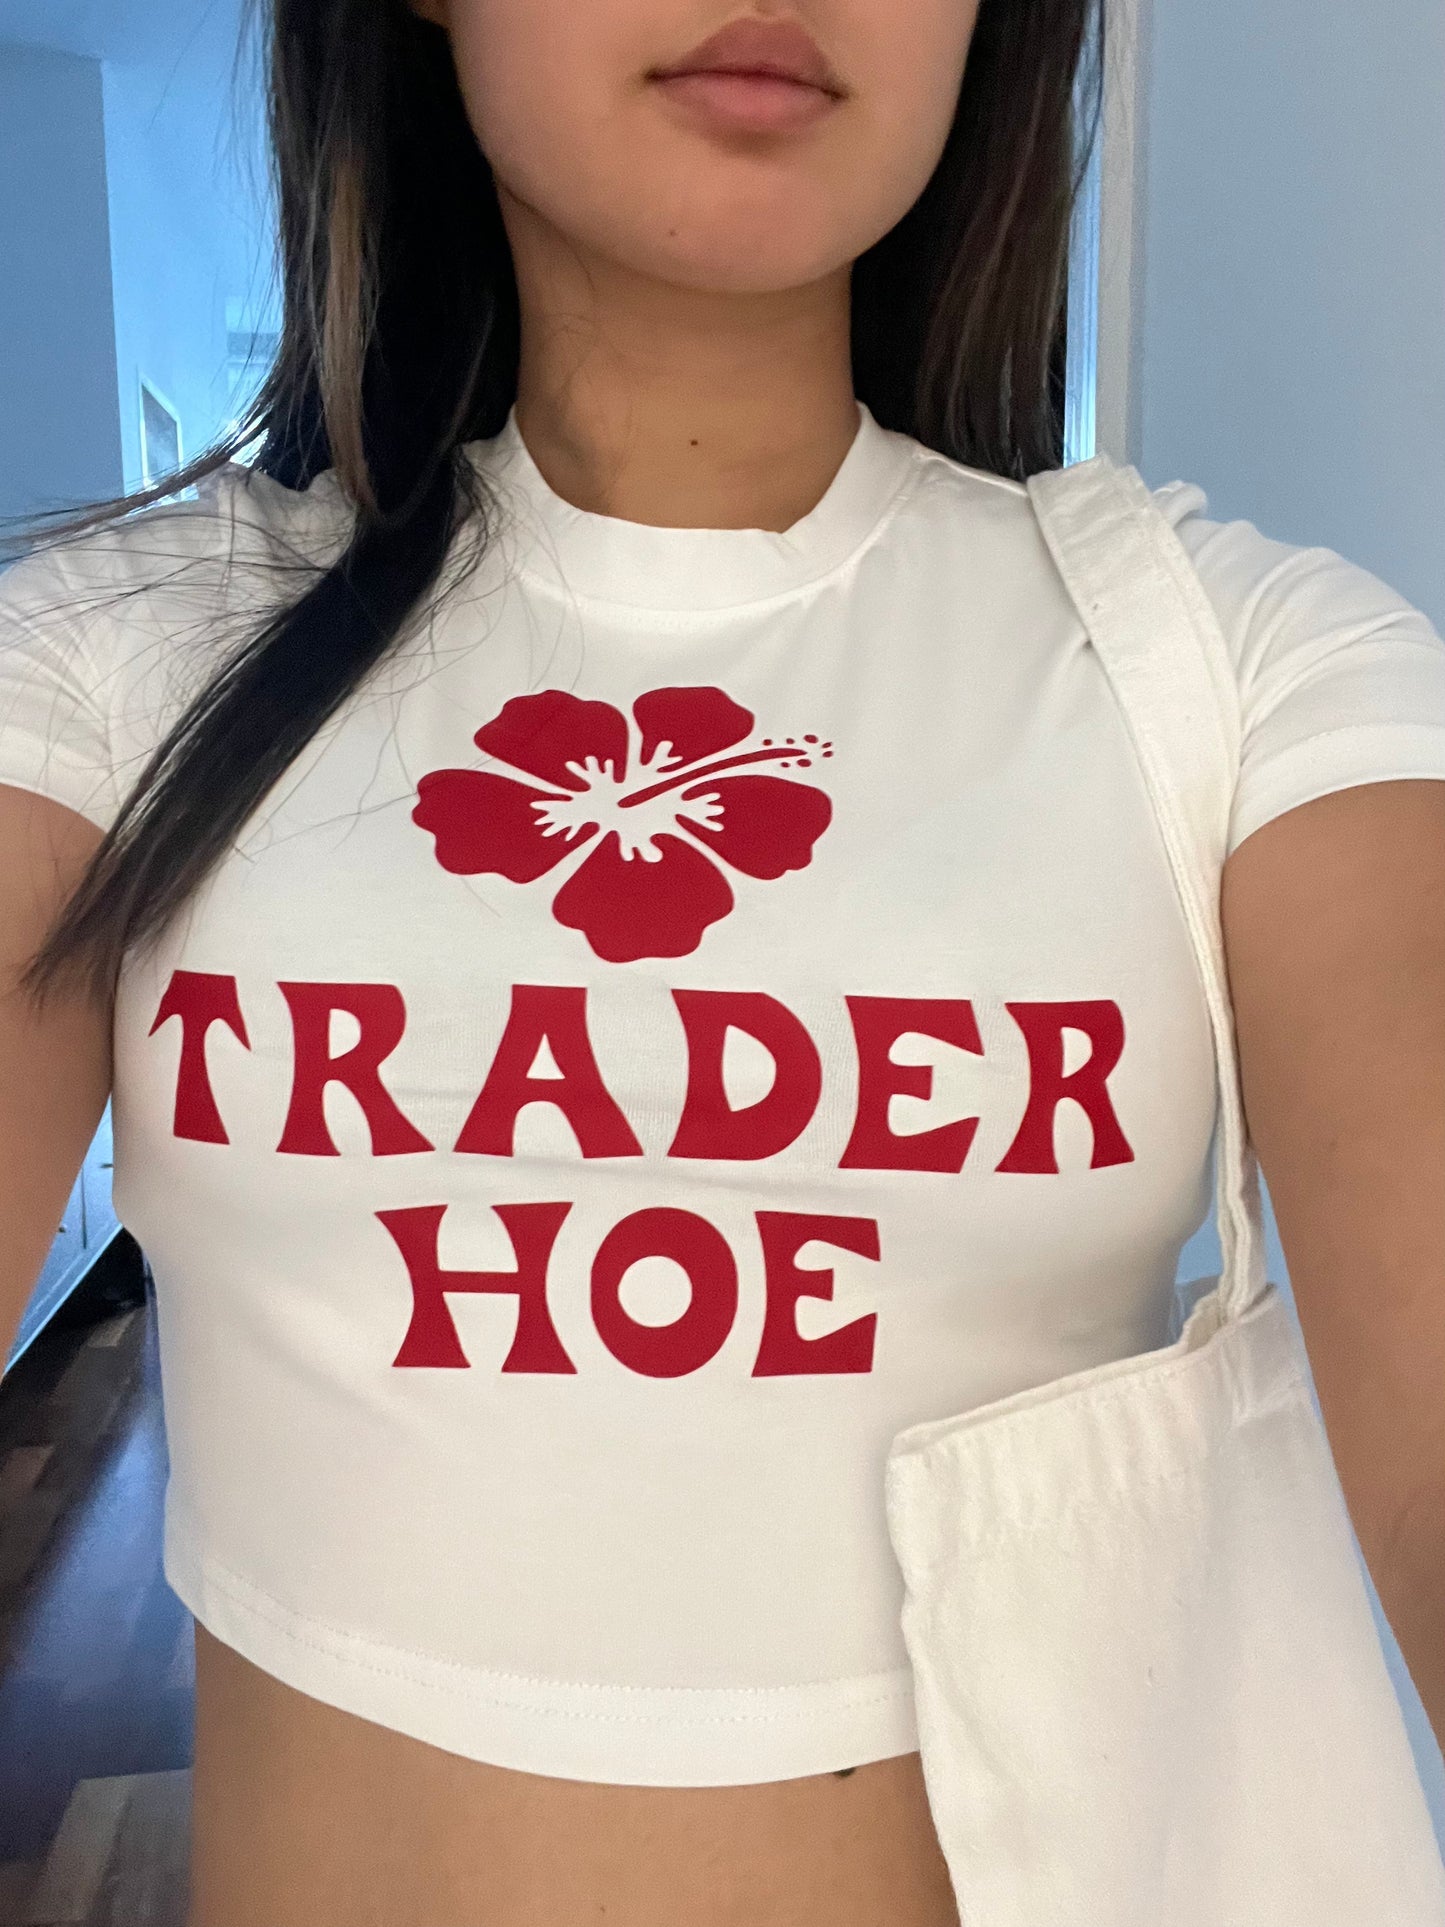 Trader Hoe Baby Tee